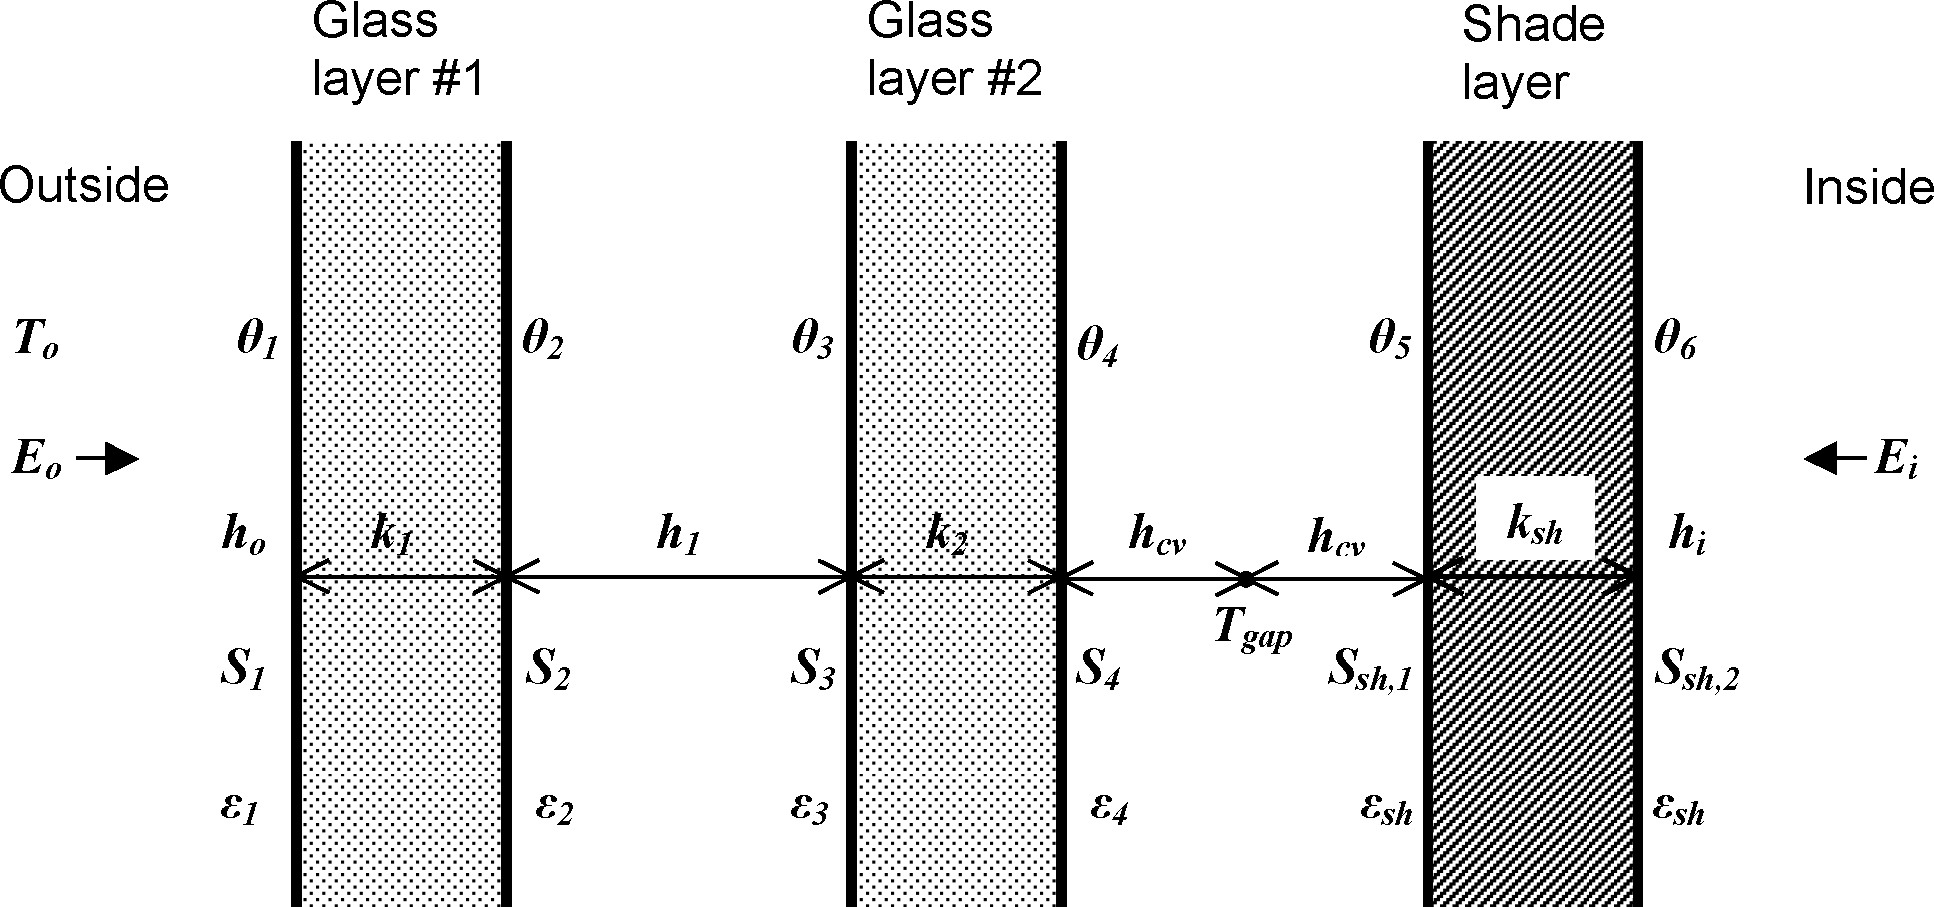 Glazing system with two glass layers and an interior shading layer showing variables used in heat balance equations.